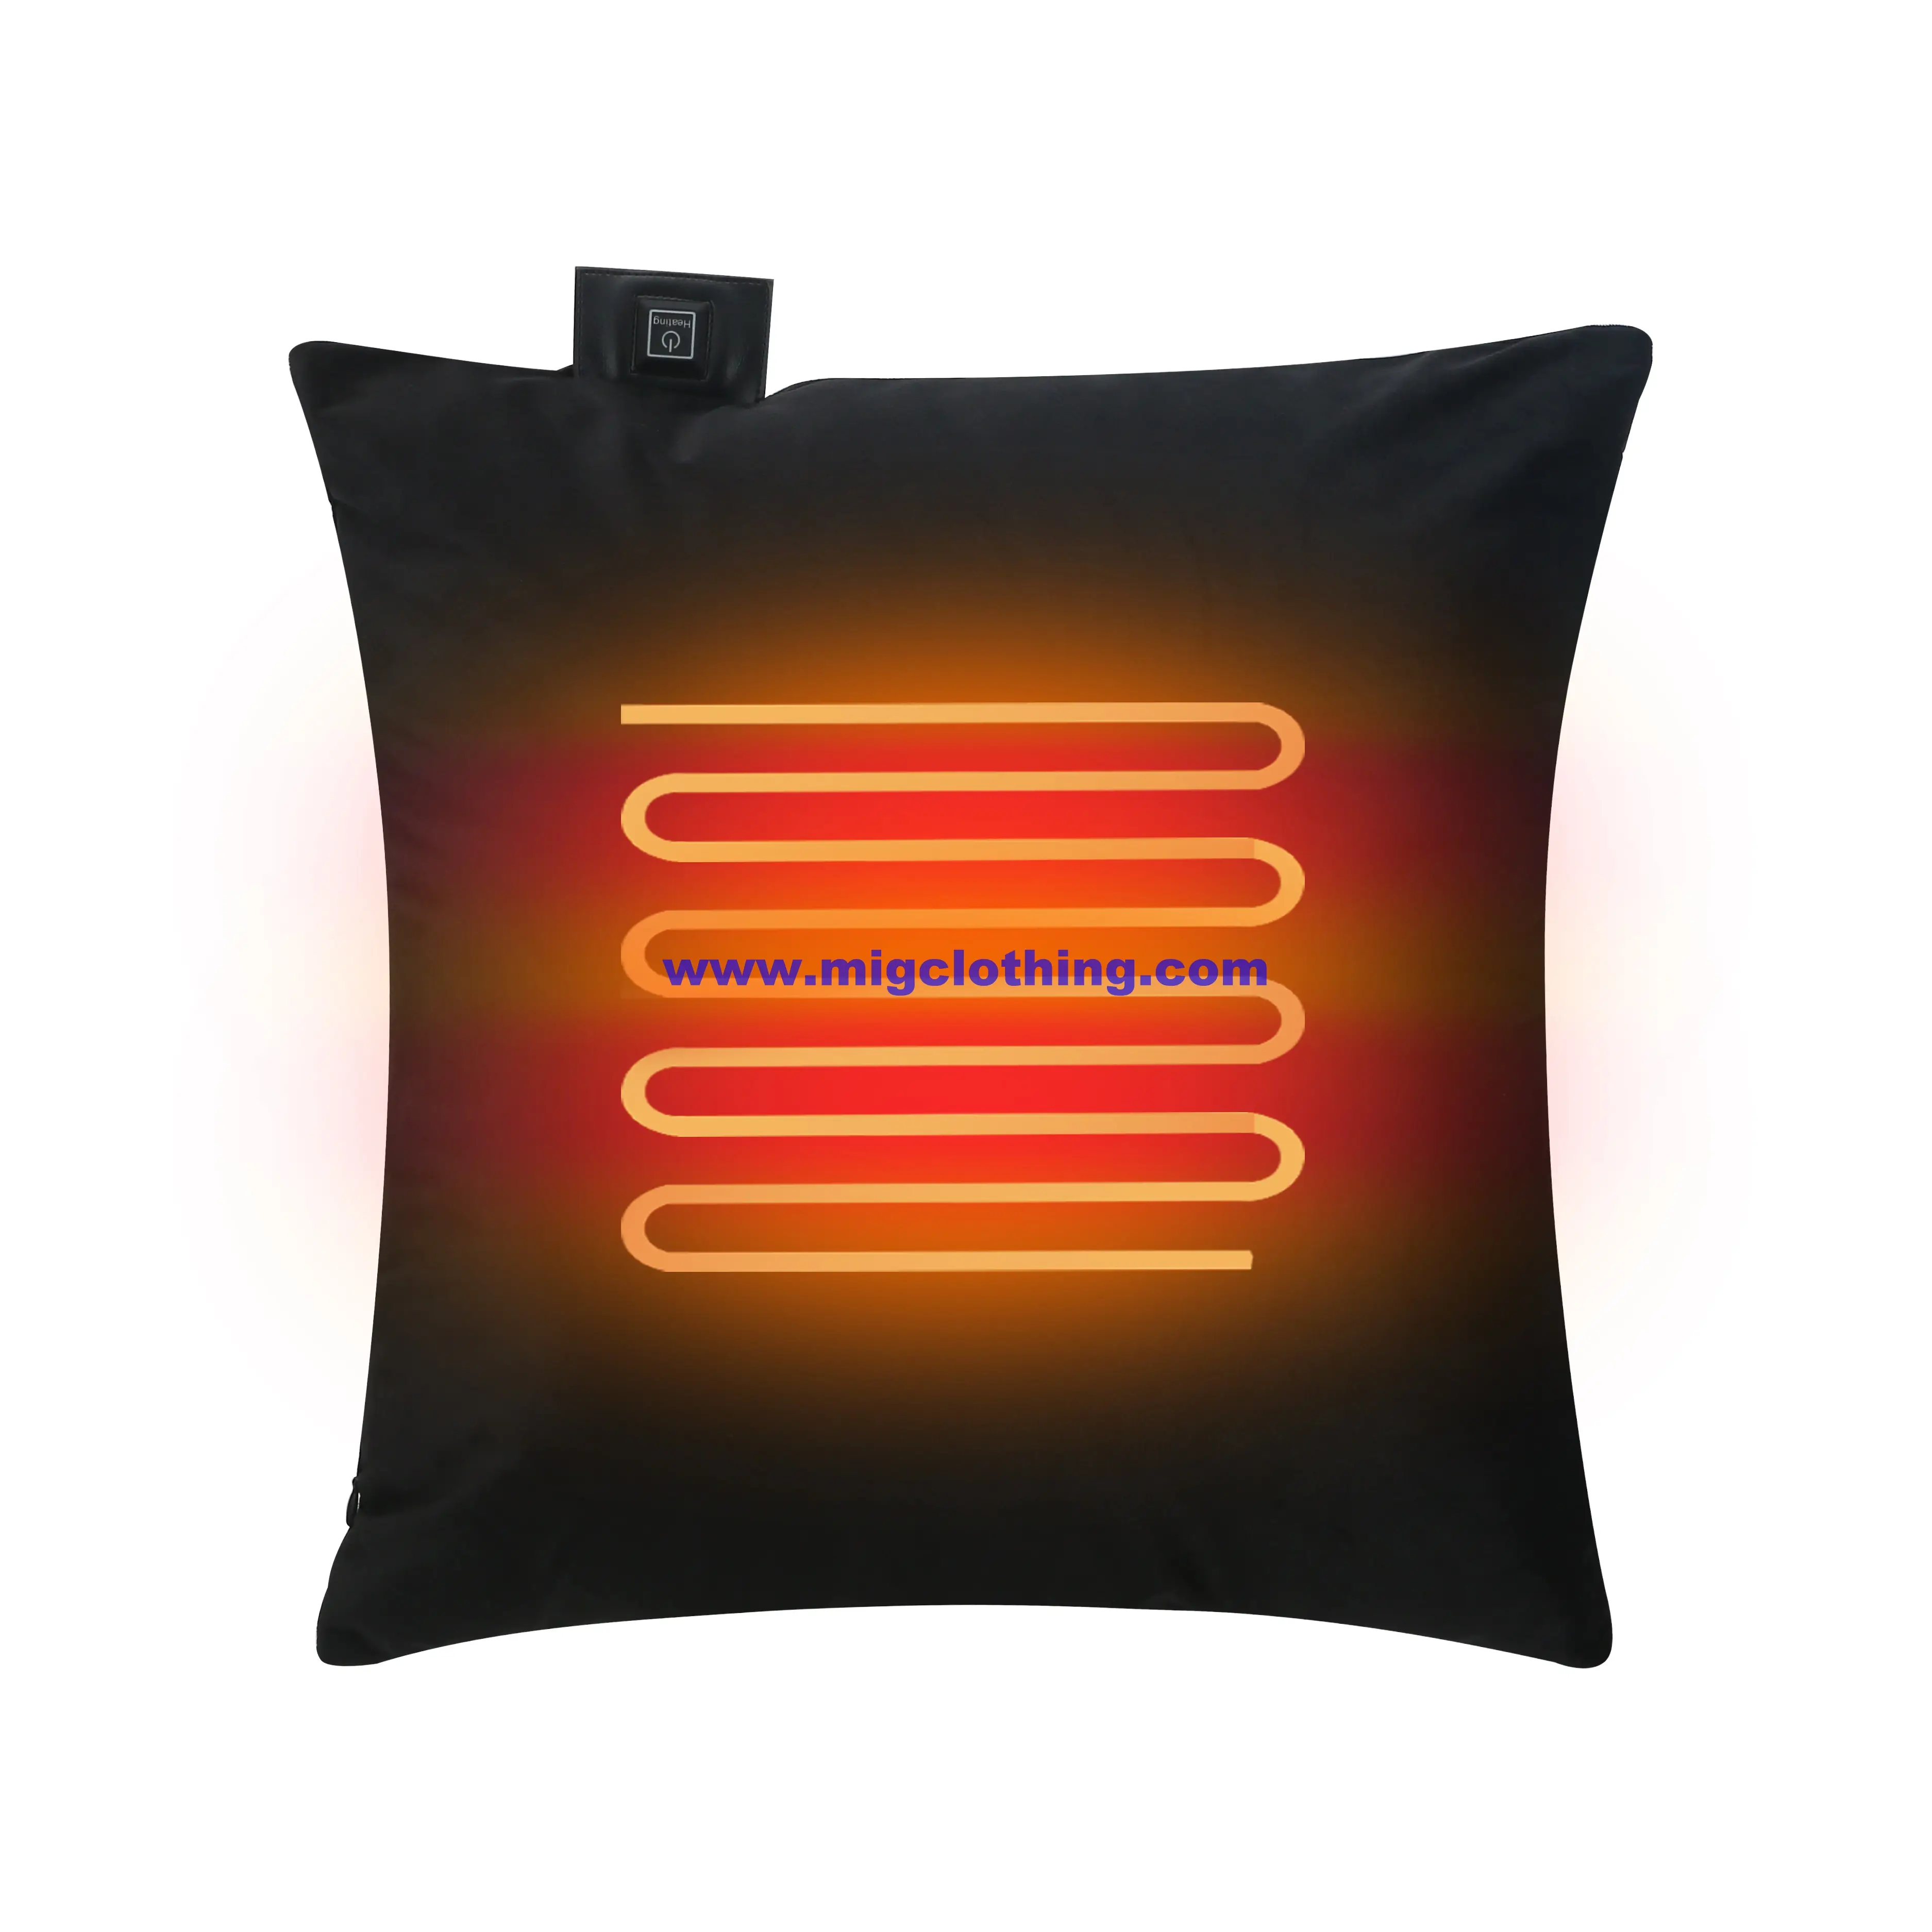 Heated Pillow Back Cushion with USB powered by Power Bank outdoor heating cushion